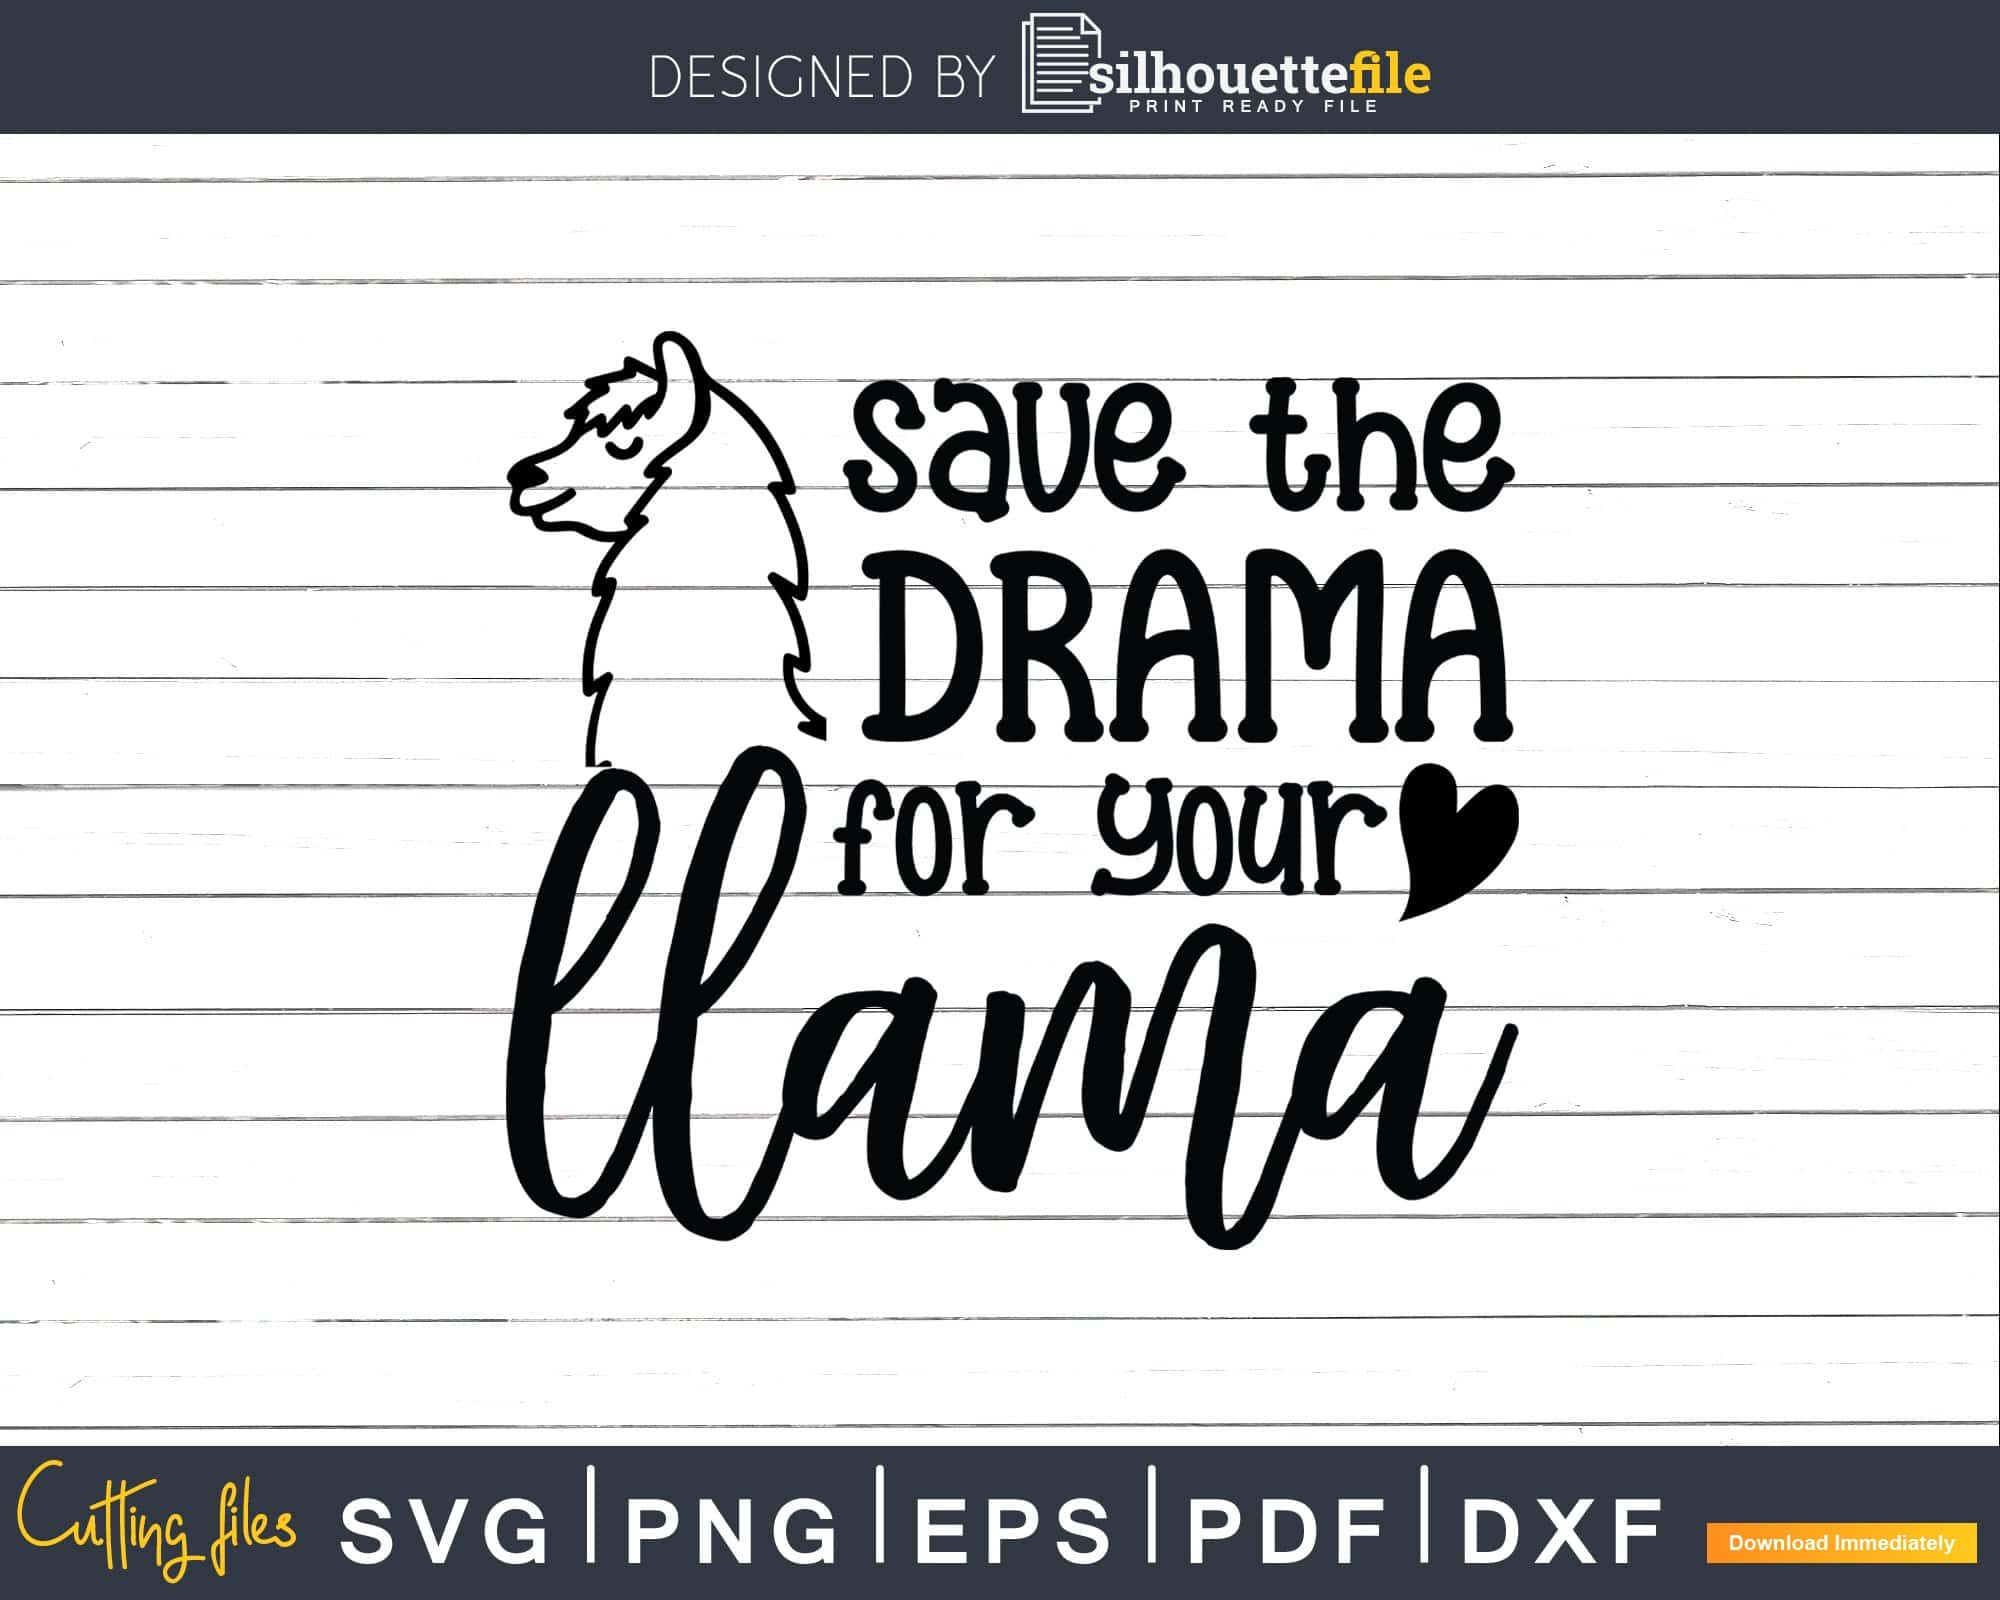 Download Save The Drama For Your Llama Svg Cut Files Silhouette Silhouettefile